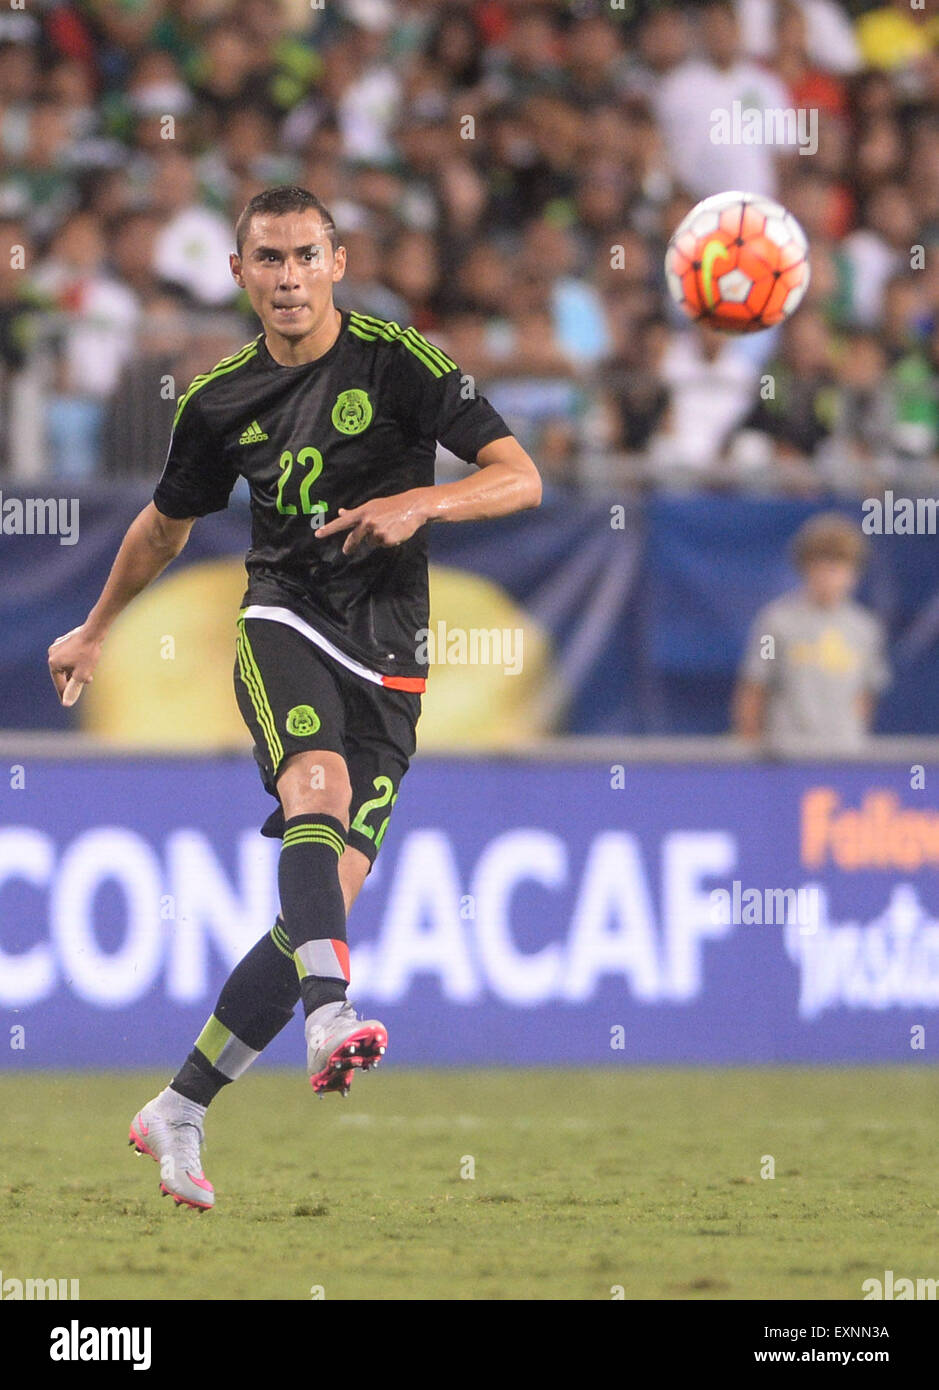 July 15, 2015:Mexico defender Paul Aguilar (22) passes the ball during the 2015 CONCACAF Gold Cup Group C match between Mexico and Trinidad & Tobago at Bank of America Stadium in Charlotte, North Carolina. PJ Ward-Brown/Cal Sport Media Stock Photo